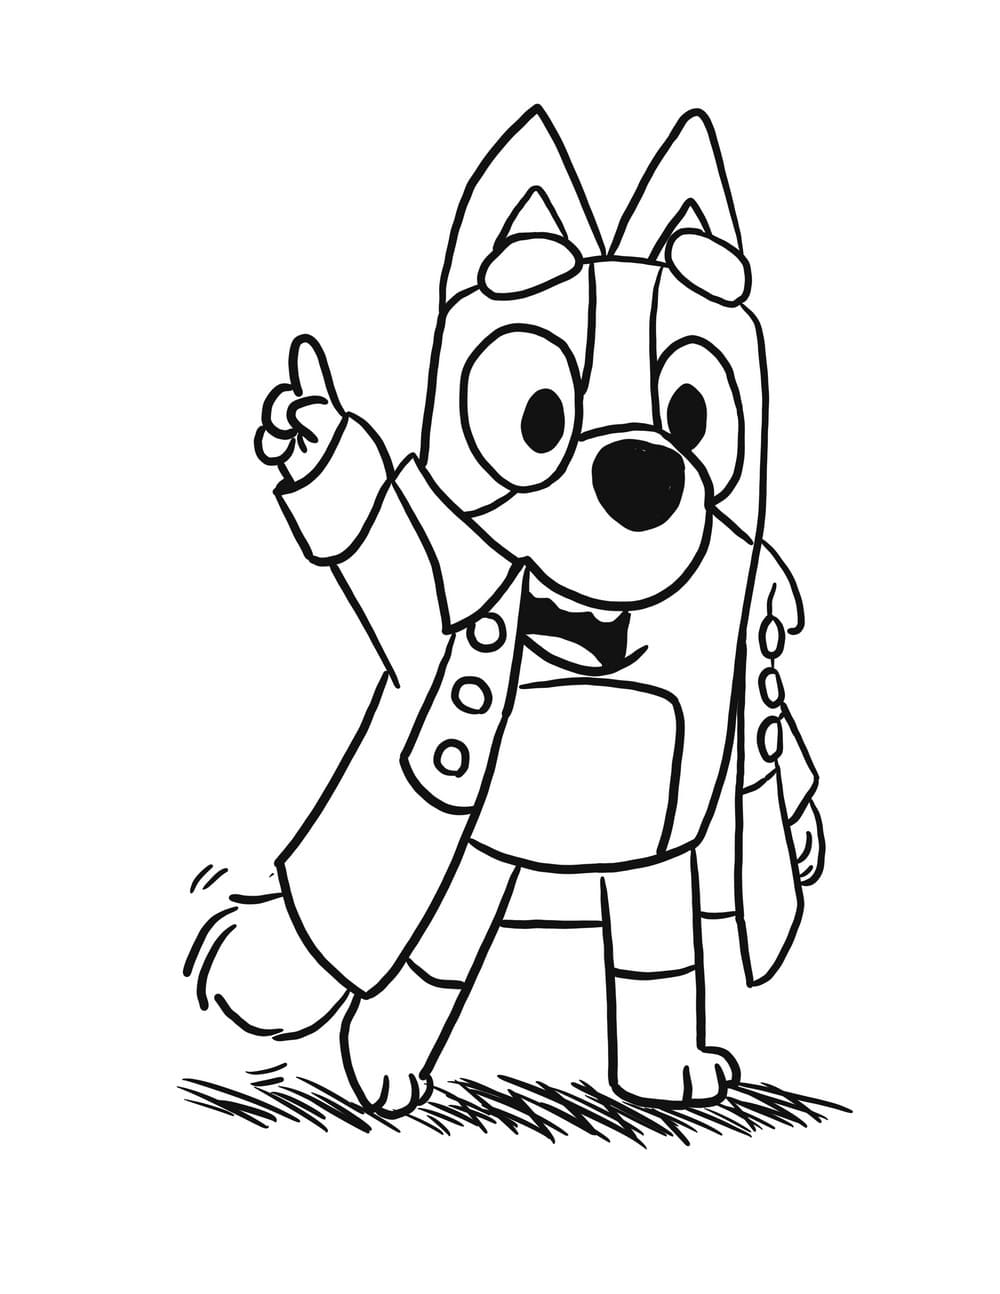 Bluey coloring pages. Print or download for free | WONDER DAY